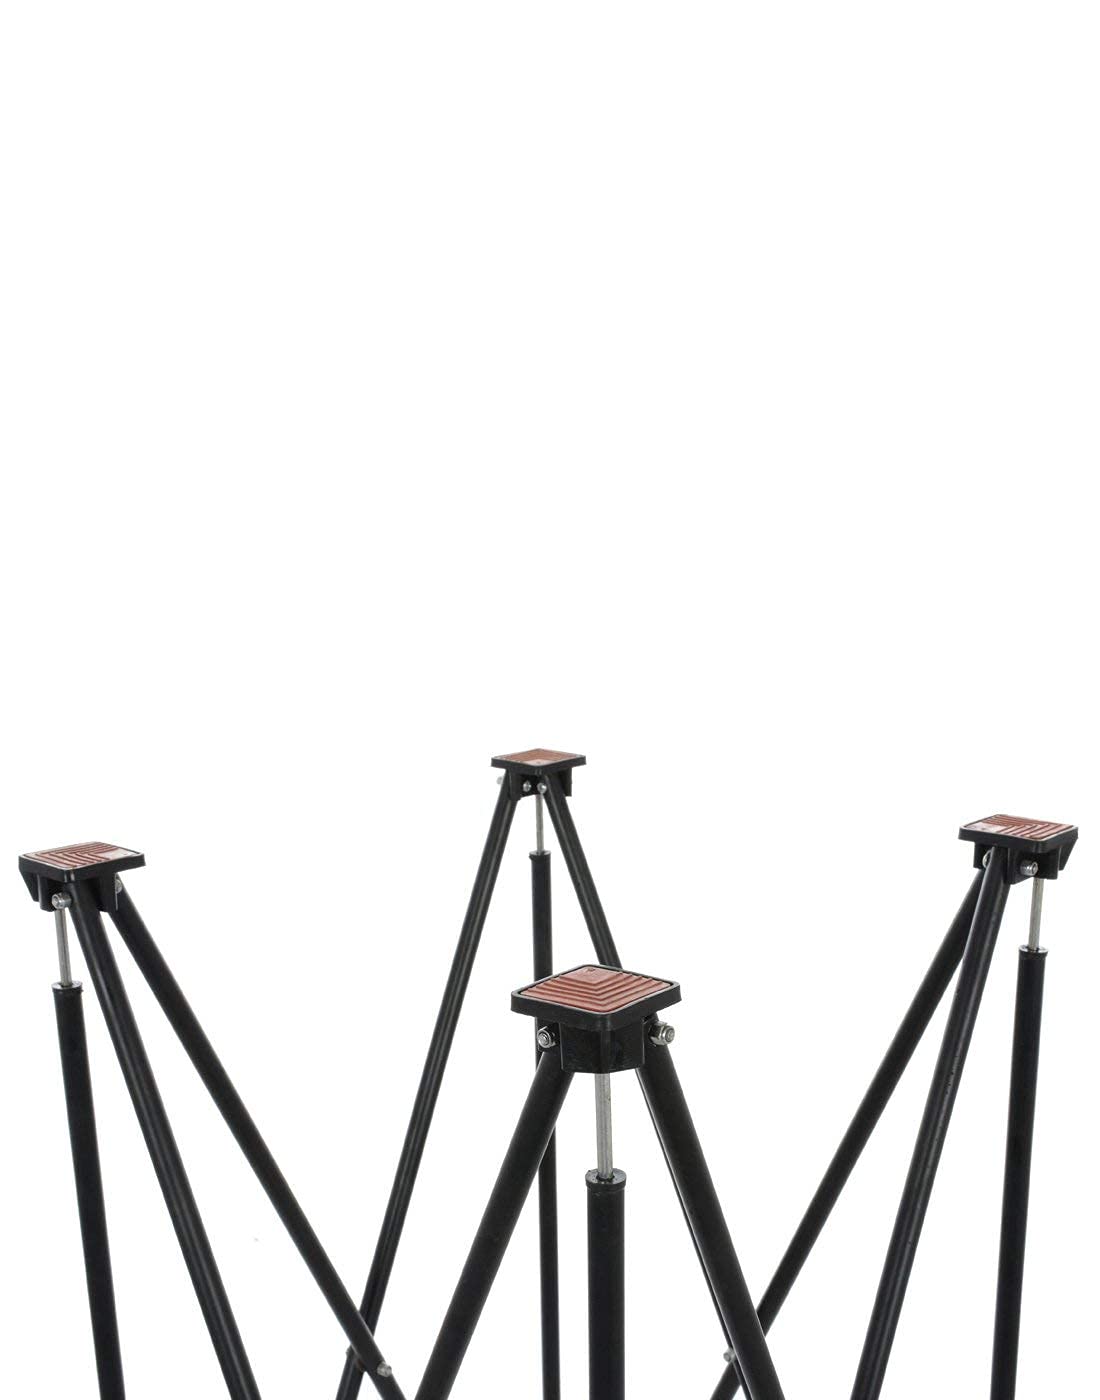 Detec™ Synco C/Stand Carrom Stand